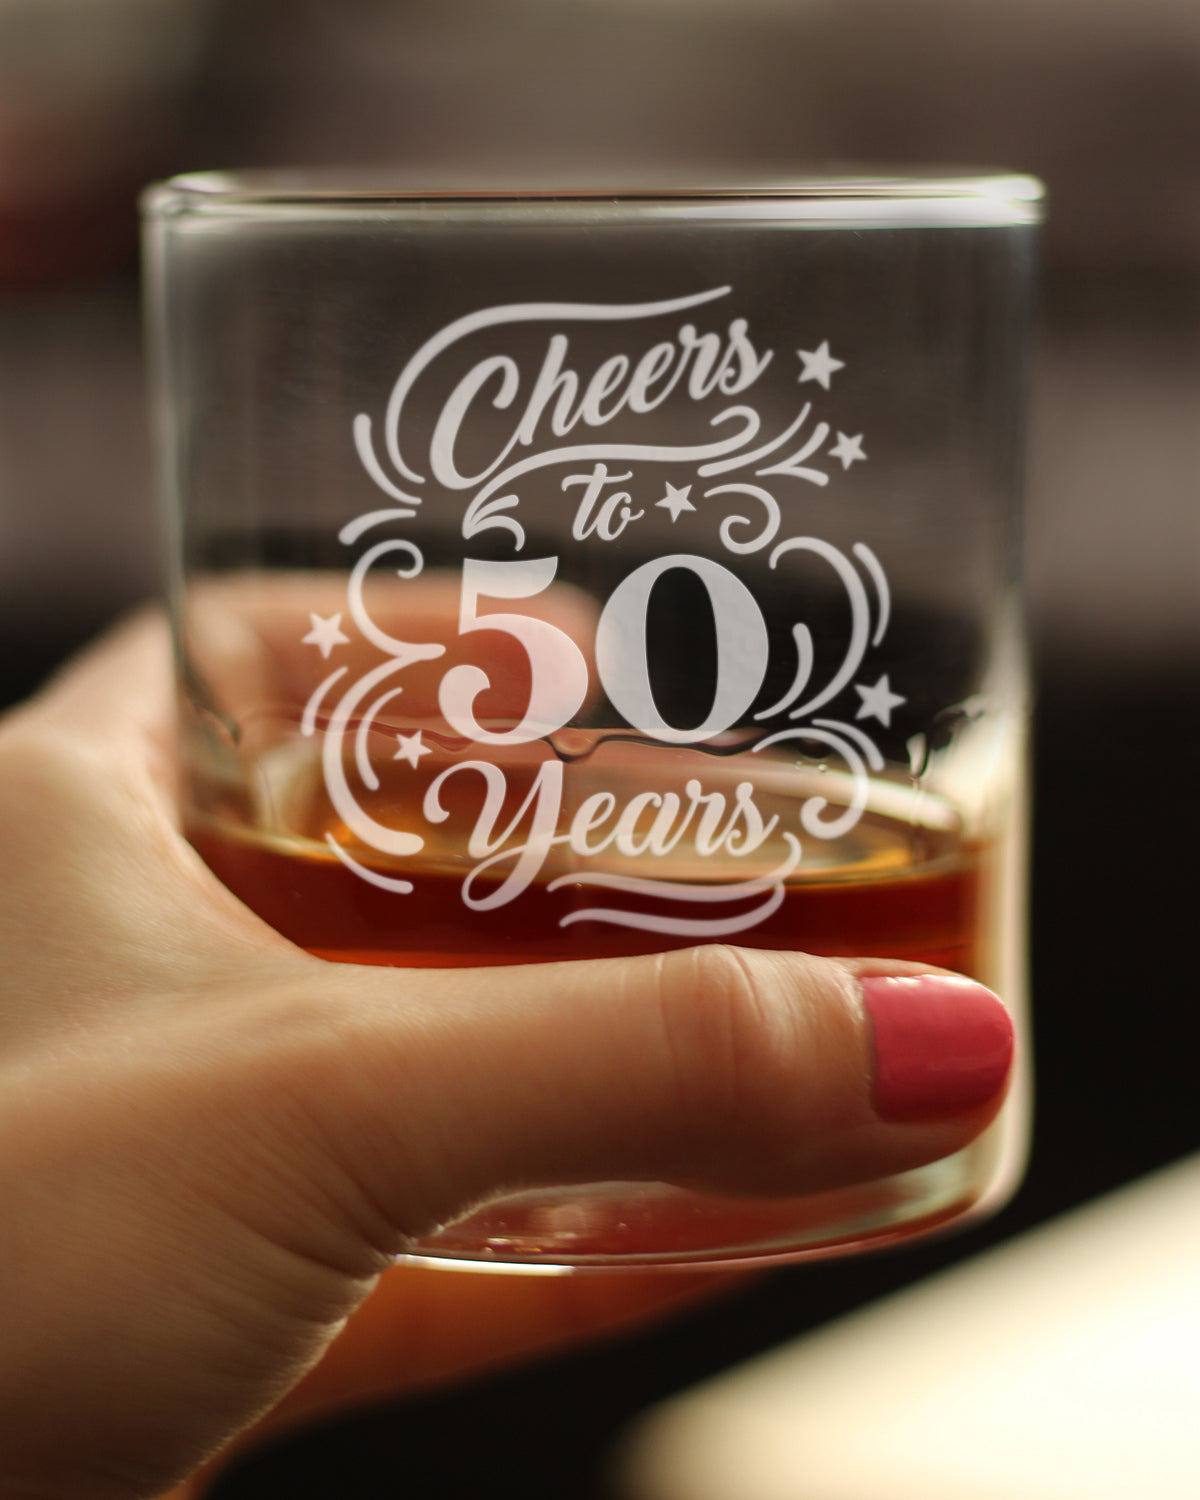 Cheers to 50 Years - Whiskey Rocks Glass Gifts for Women &amp; Men - 50th Anniversary Party Decor - 10.25 Oz Glasses